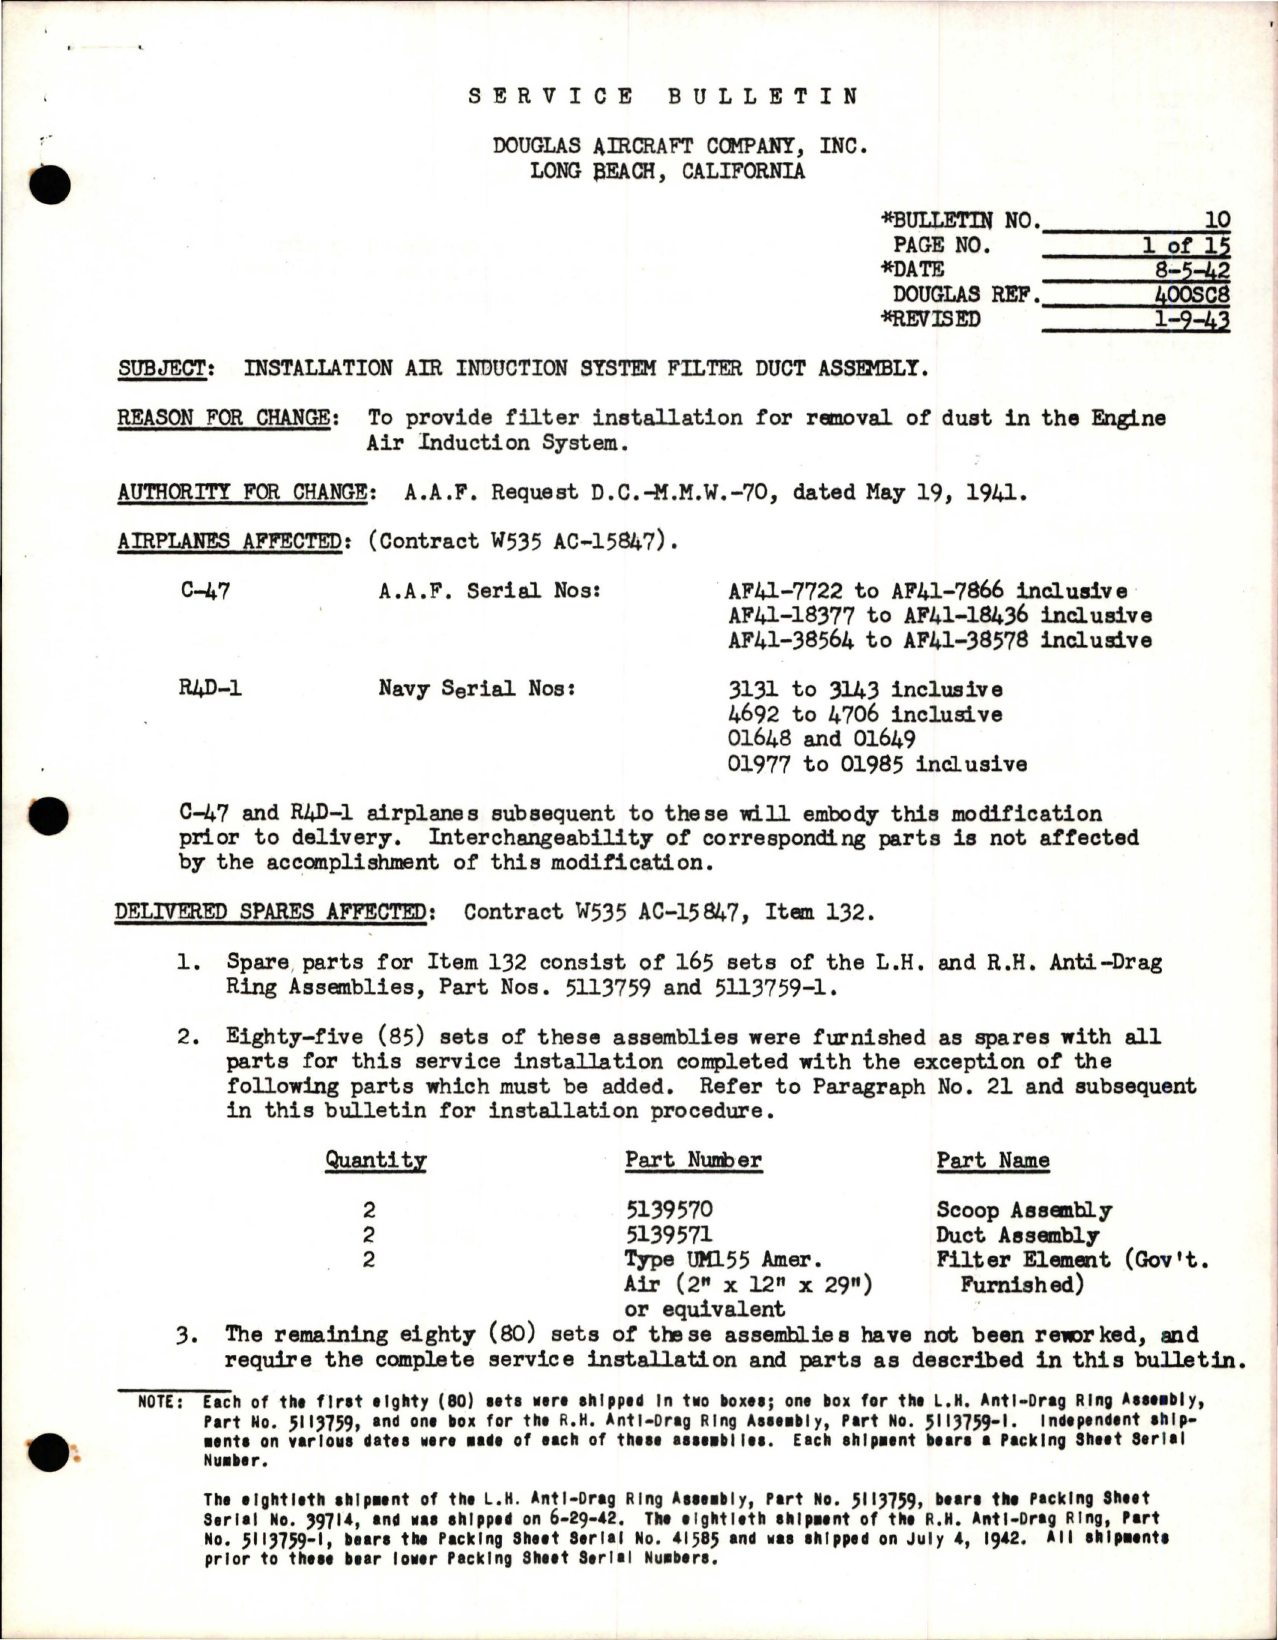 Sample page 1 from AirCorps Library document: Installation Air Induction System Filter Duct Assembly